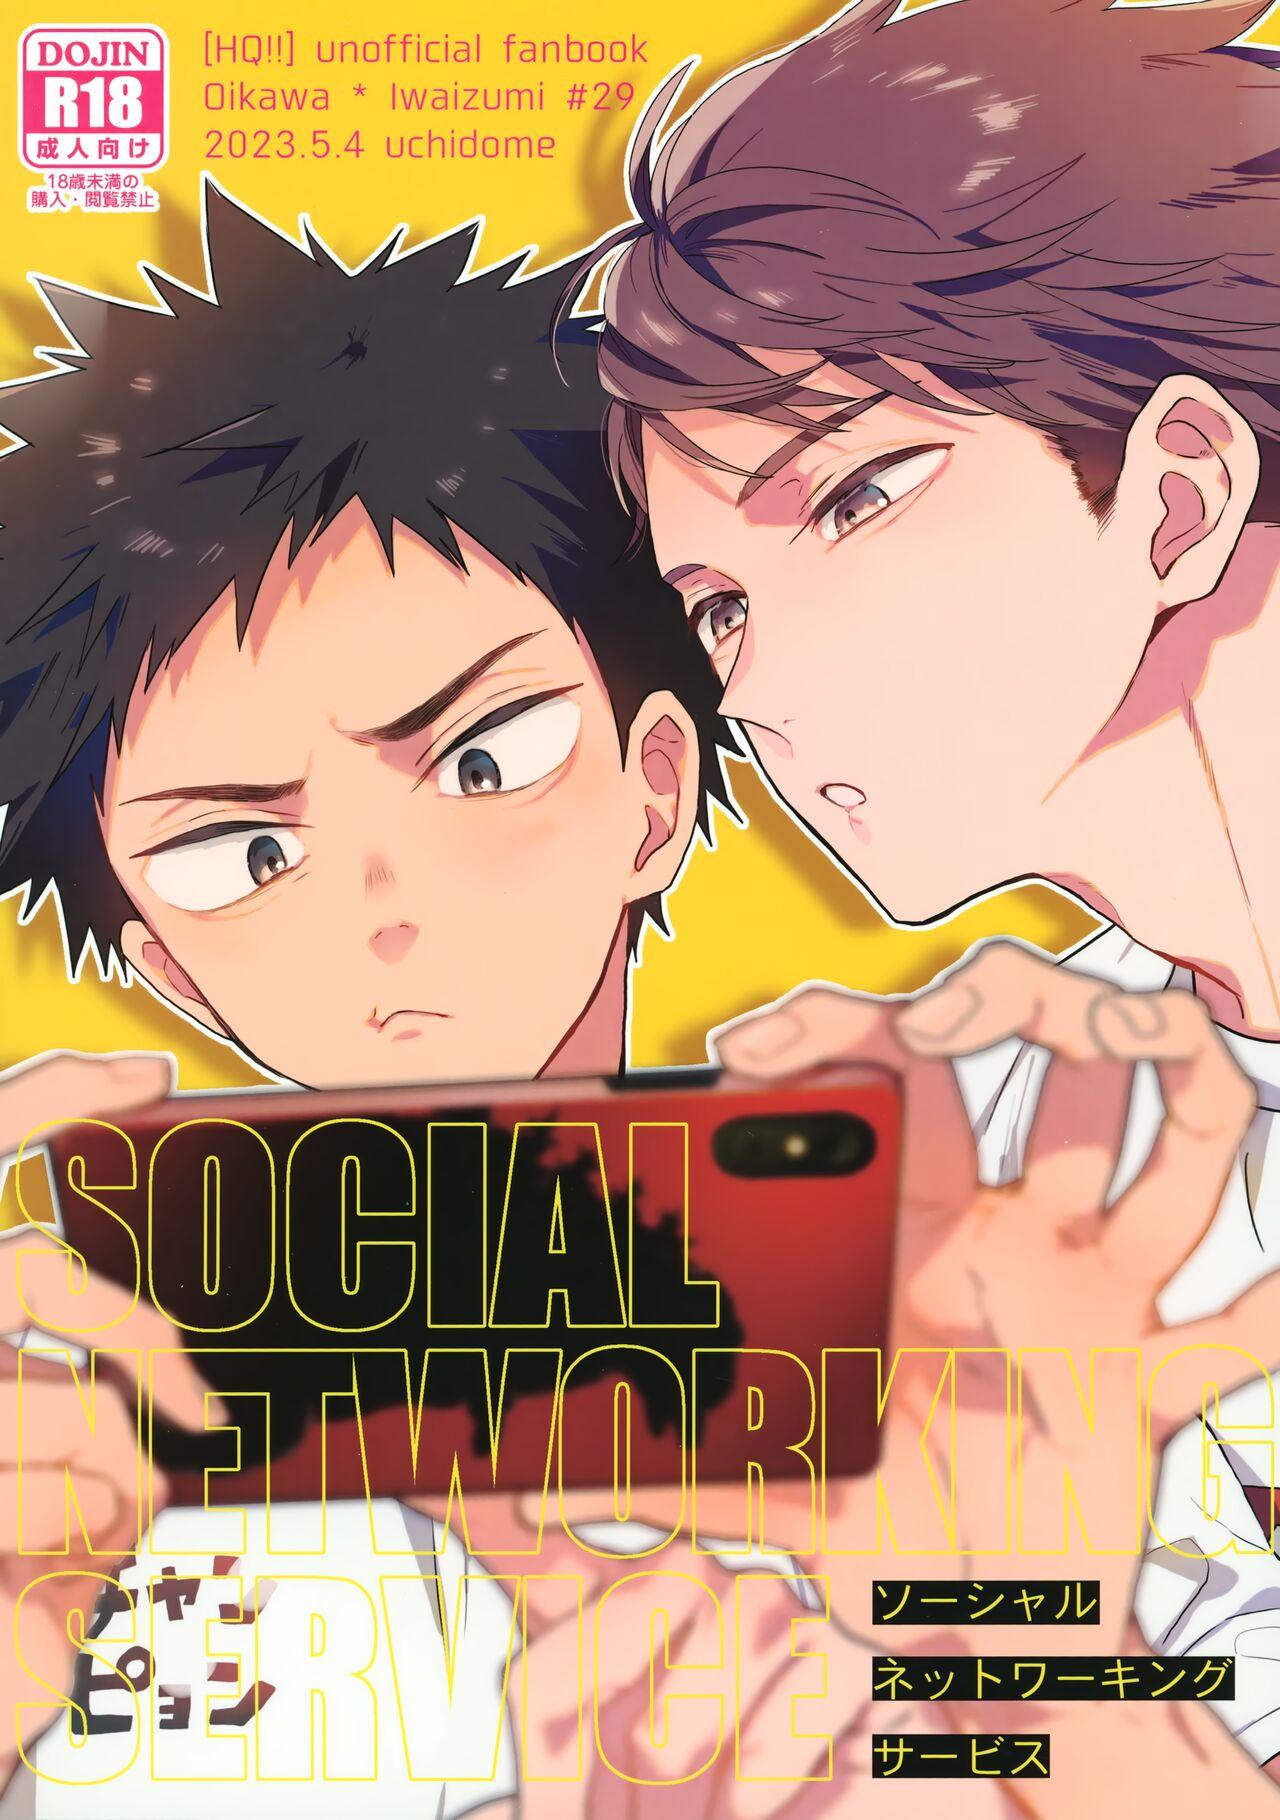 Culote SOCIAL NETWORK SERVICE - Haikyuu Hot Girls Getting Fucked - Page 1